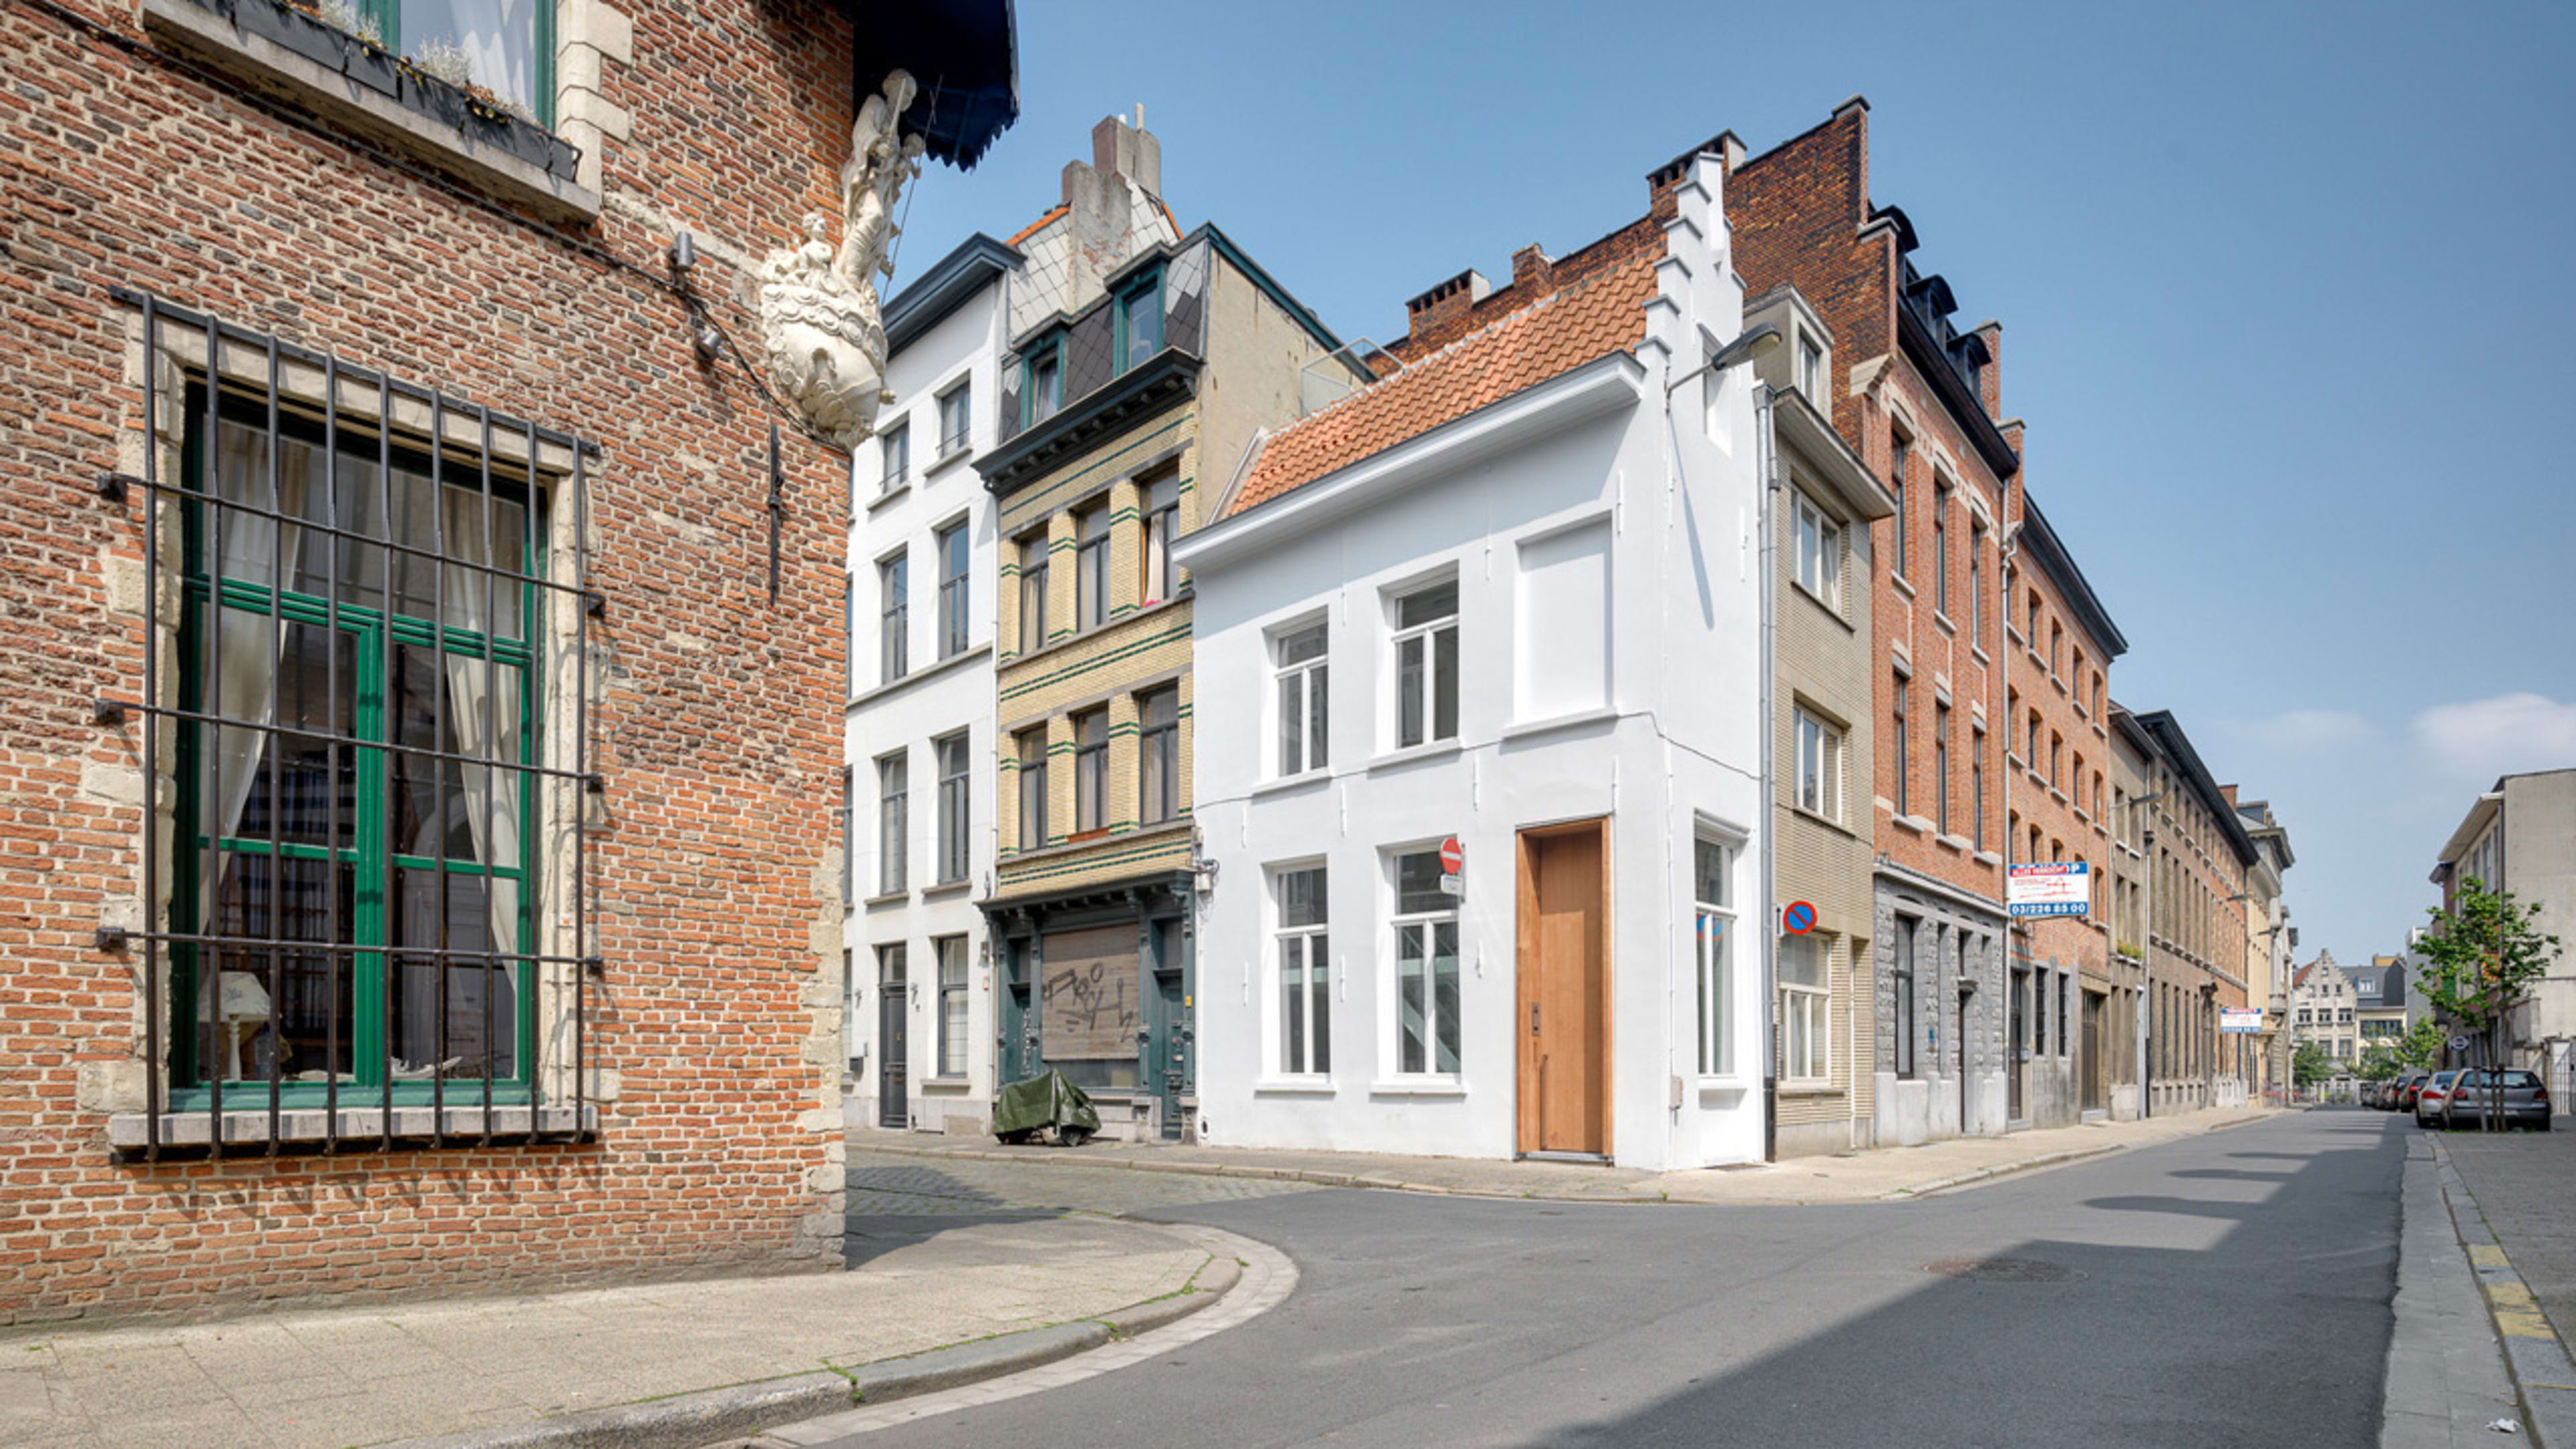 This single-room hotel is 400 years old and eight feet wide